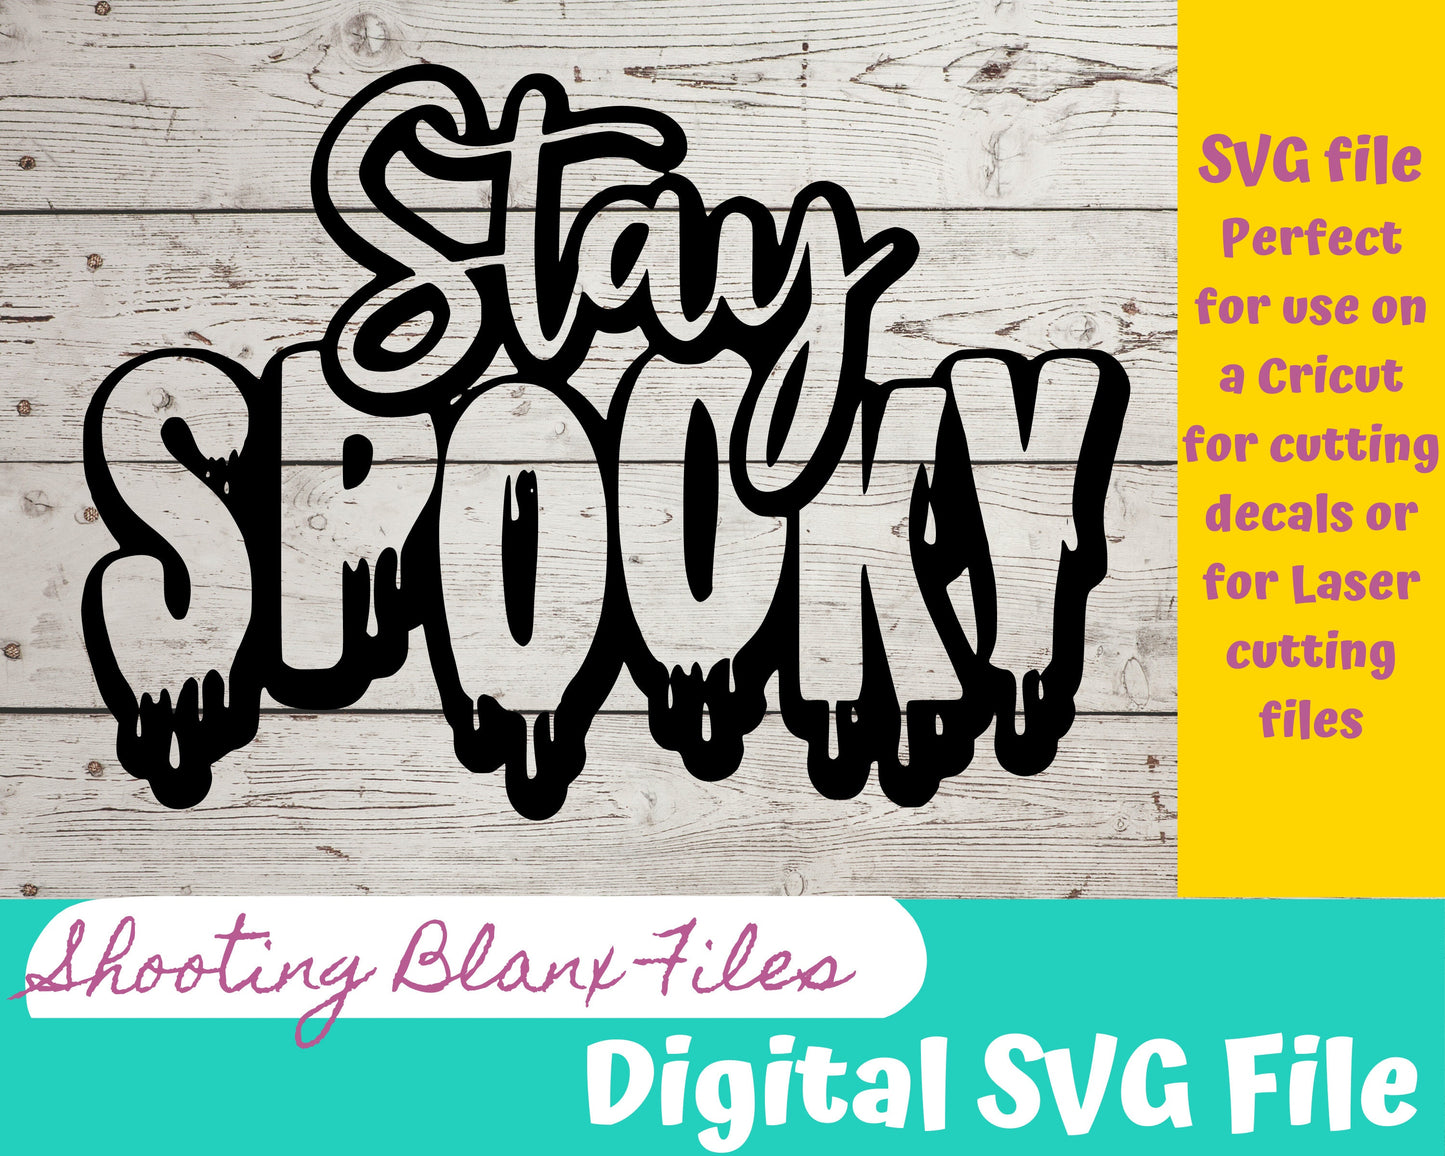 Stay Spooky SVG file for Cricut - laser engraving Glowforge, Scary, Halloween, Minimalistic, Halloween, Horror, phrase, saying